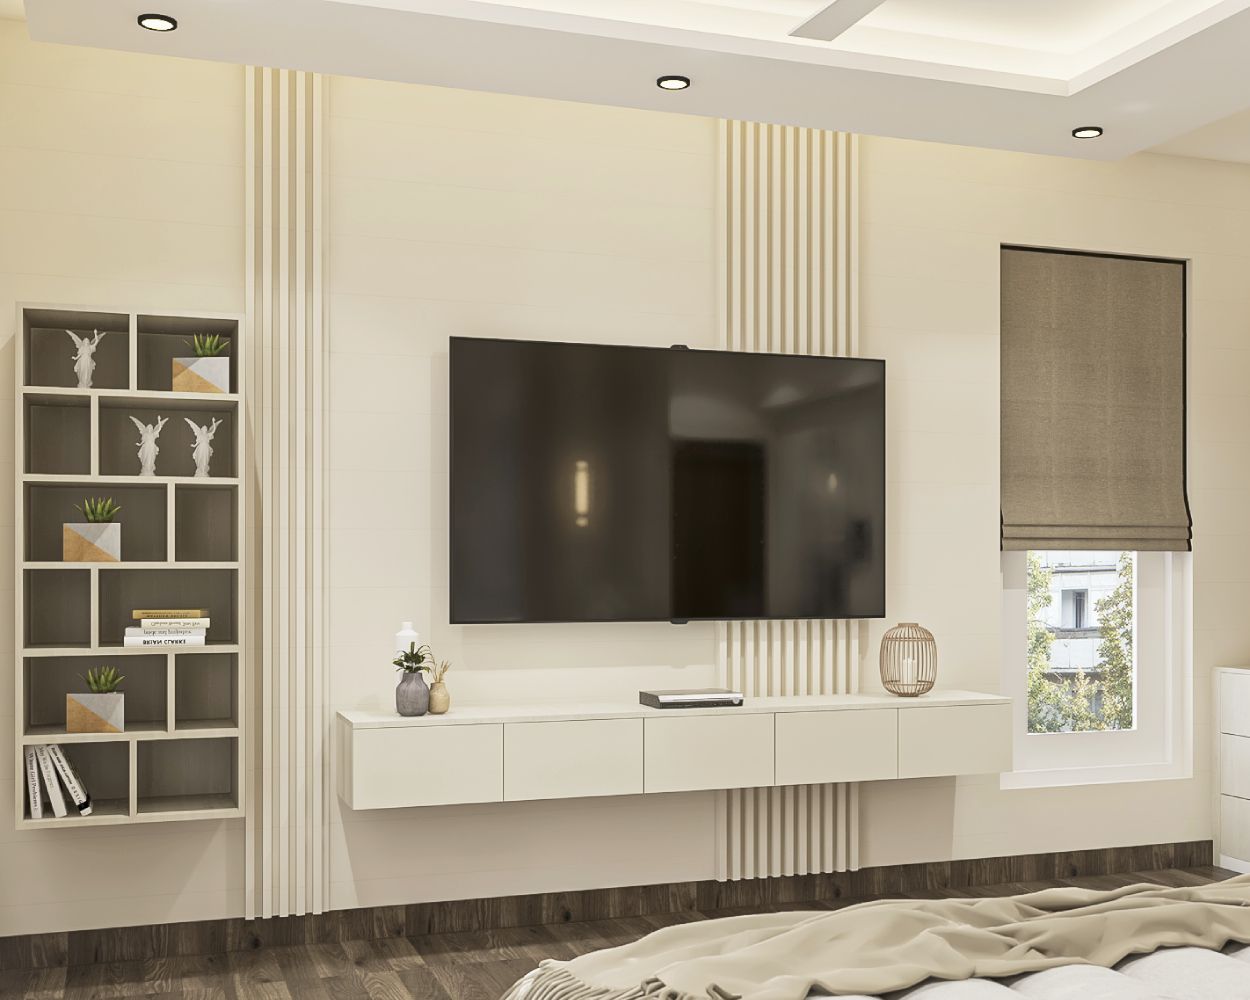 Champagne-Toned Modern TV Unit Design With Wall-Mounted Console And Built-In Wall Storage